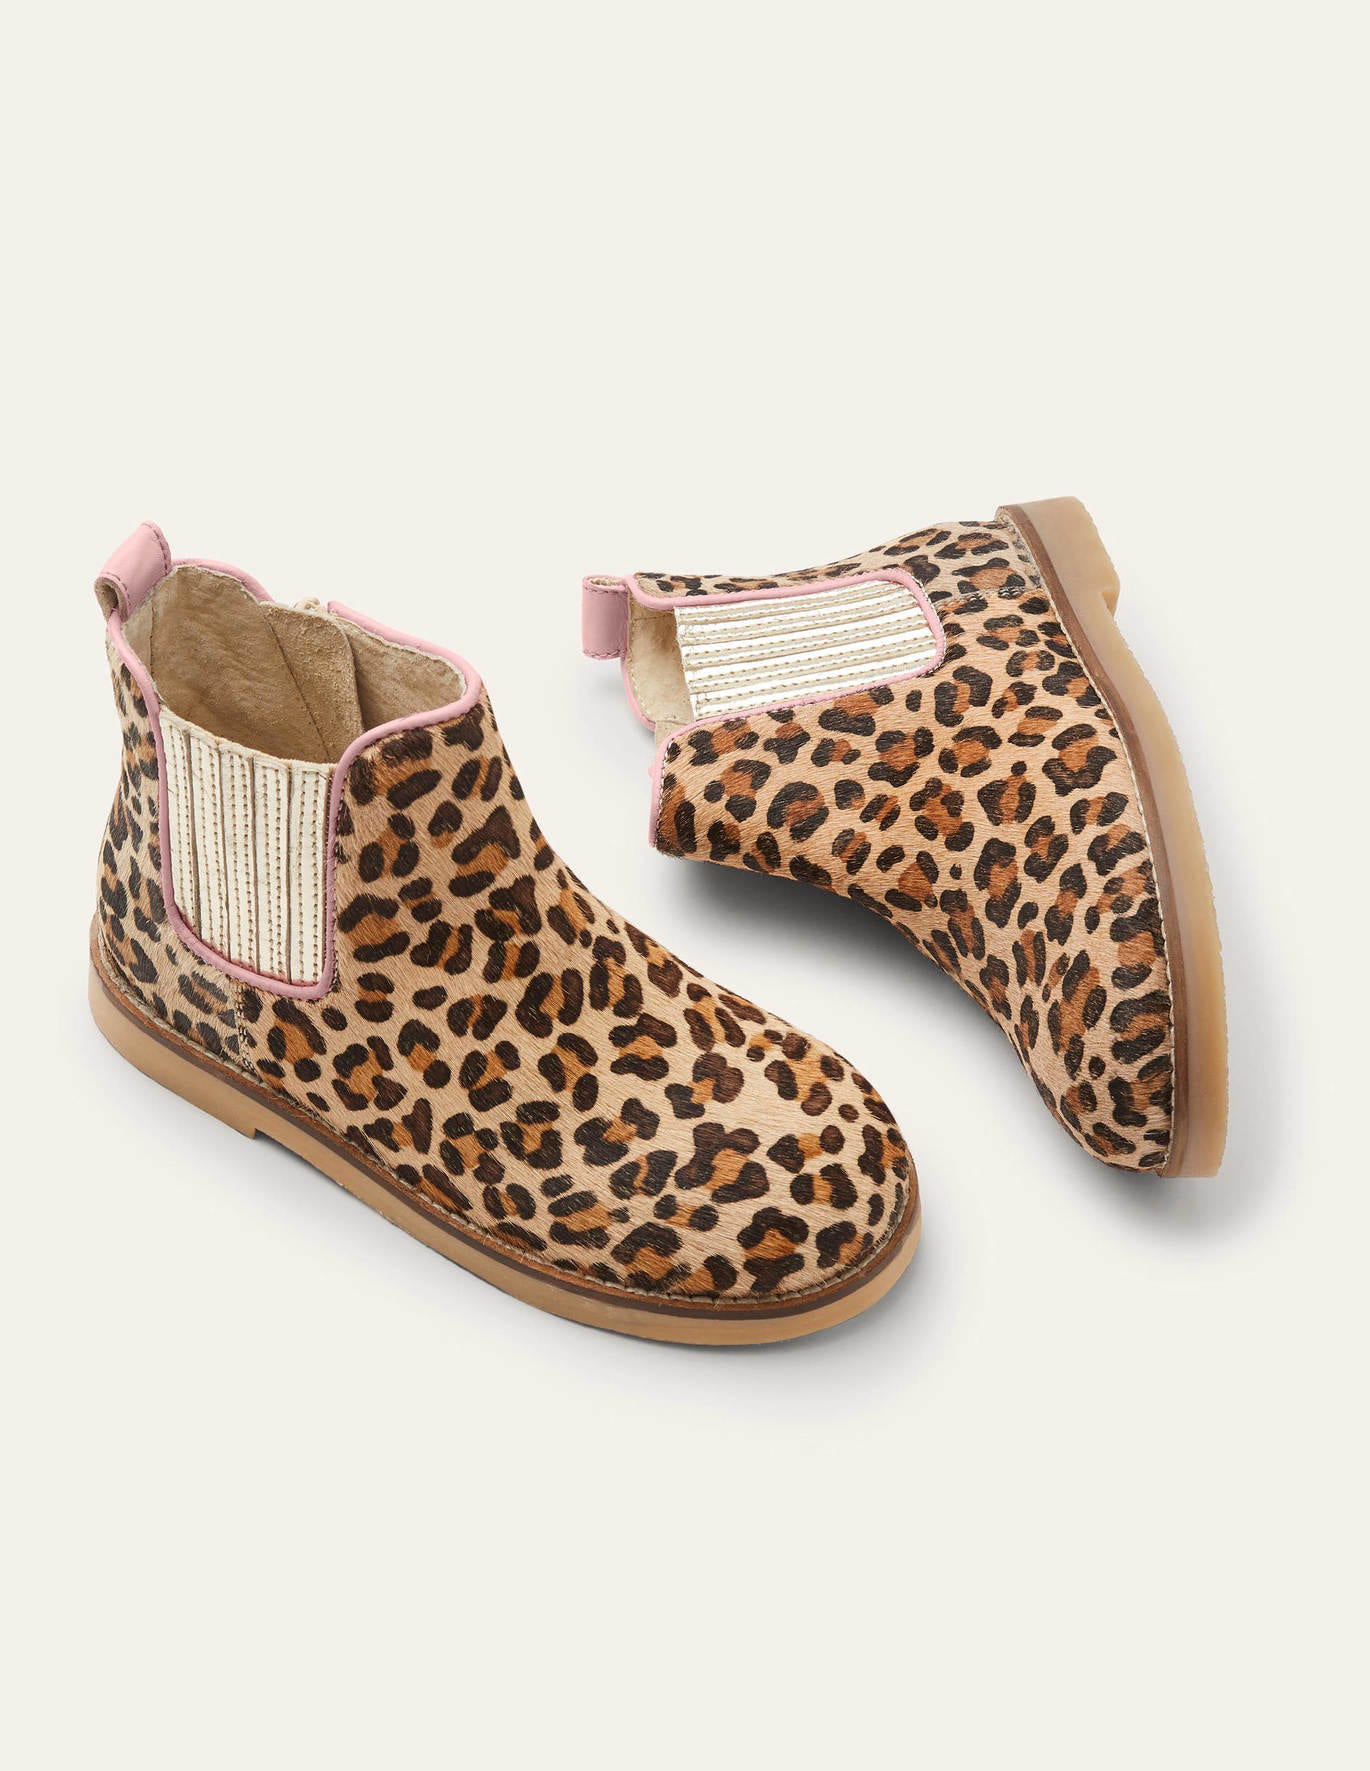 Boden Leather Chelsea Boots - Leopard